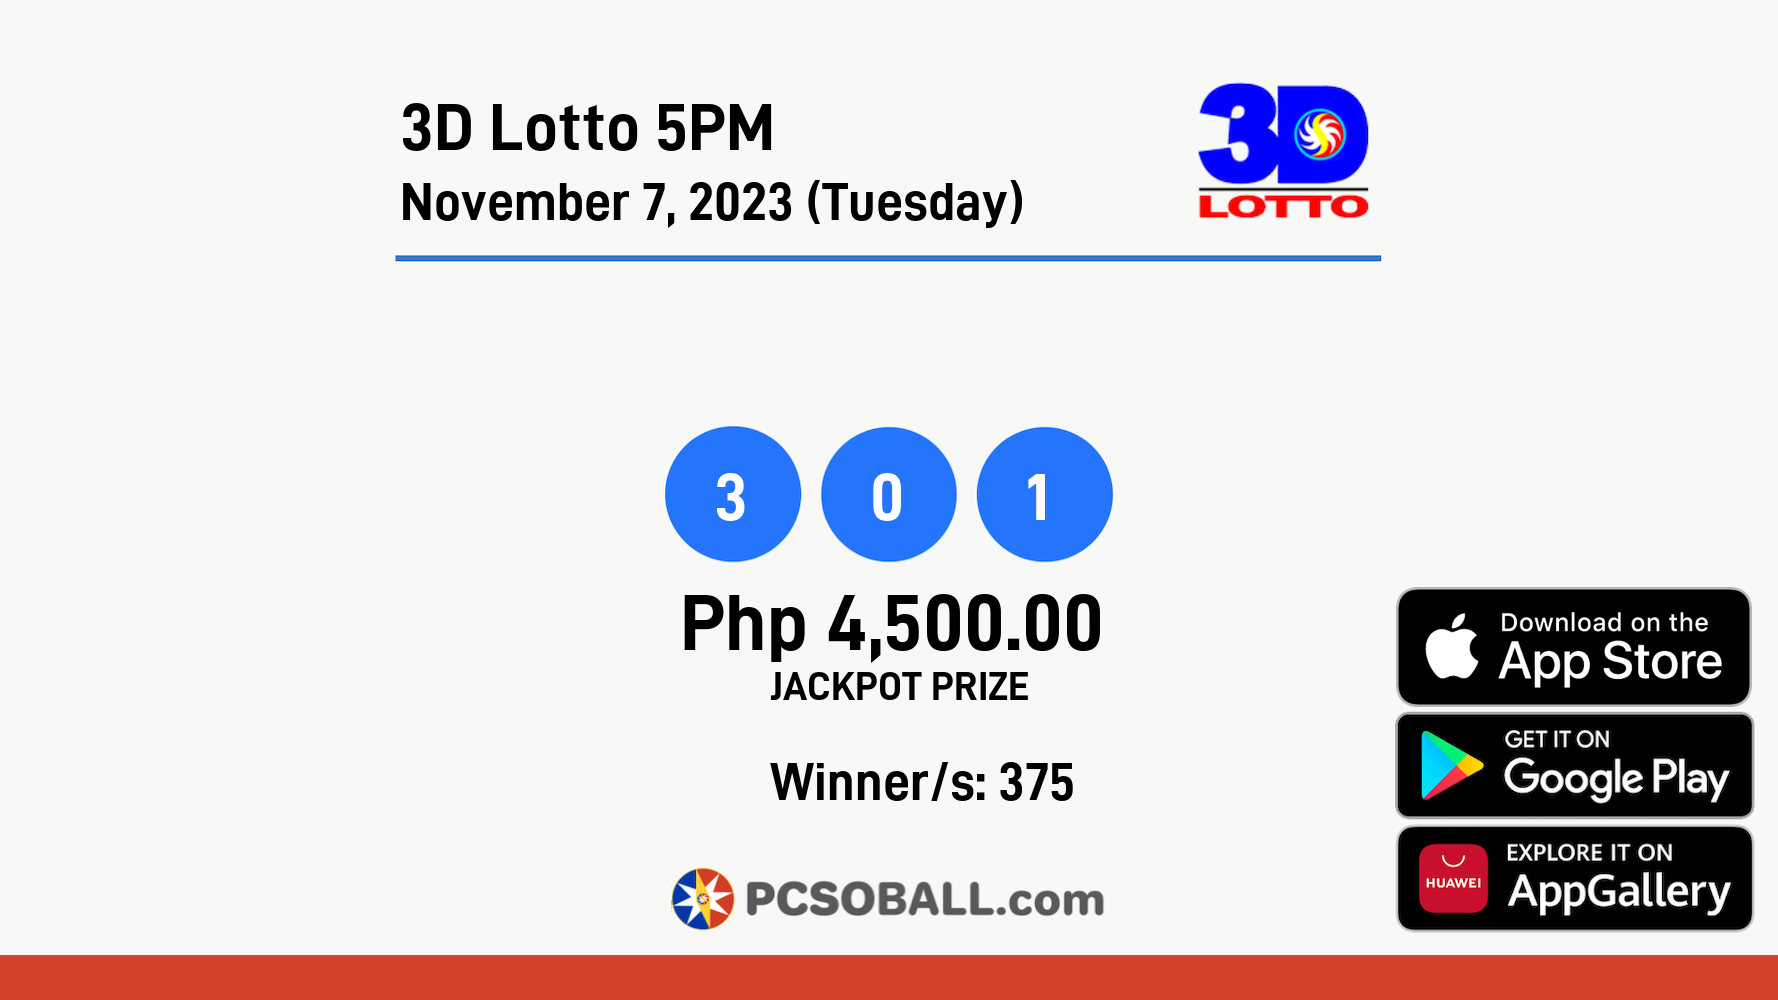 3D Lotto 5PM November 7, 2023 (Tuesday) Result